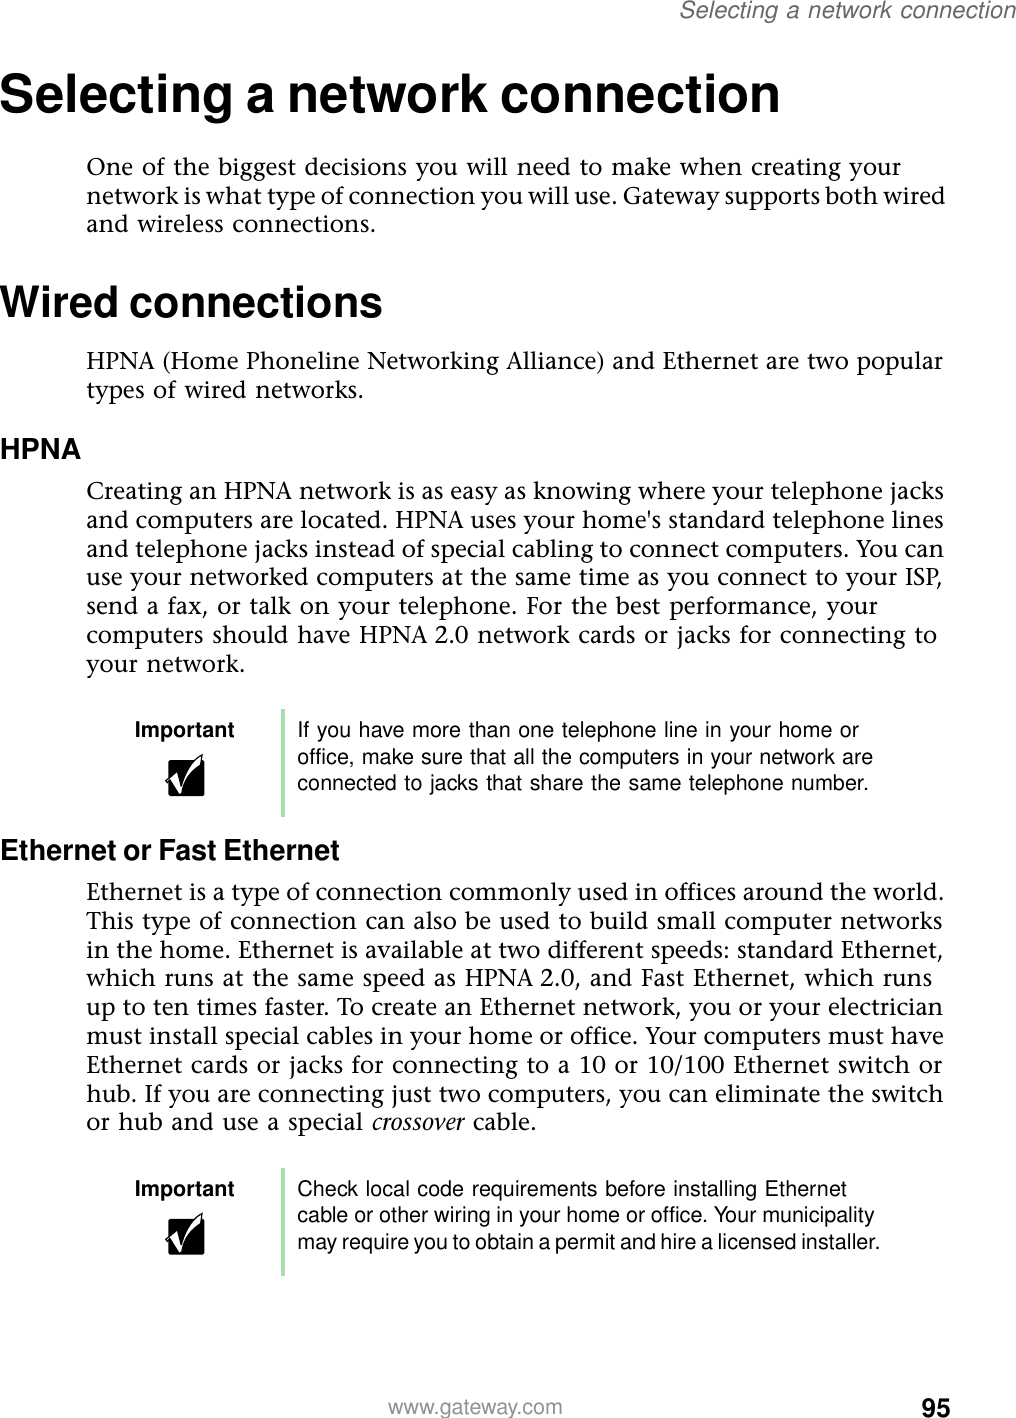 95Selecting a network connectionwww.gateway.comSelecting a network connectionOne of the biggest decisions you will need to make when creating your network is what type of connection you will use. Gateway supports both wired and wireless connections.Wired connectionsHPNA (Home Phoneline Networking Alliance) and Ethernet are two popular types of wired networks.HPNACreating an HPNA network is as easy as knowing where your telephone jacks and computers are located. HPNA uses your home&apos;s standard telephone lines and telephone jacks instead of special cabling to connect computers. You can use your networked computers at the same time as you connect to your ISP, send a fax, or talk on your telephone. For the best performance, your computers should have HPNA 2.0 network cards or jacks for connecting to your network.Ethernet or Fast EthernetEthernet is a type of connection commonly used in offices around the world. This type of connection can also be used to build small computer networks in the home. Ethernet is available at two different speeds: standard Ethernet, which runs at the same speed as HPNA 2.0, and Fast Ethernet, which runs up to ten times faster. To create an Ethernet network, you or your electrician must install special cables in your home or office. Your computers must have Ethernet cards or jacks for connecting to a 10 or 10/100 Ethernet switch or hub. If you are connecting just two computers, you can eliminate the switch or hub and use a special crossover cable.Important If you have more than one telephone line in your home or office, make sure that all the computers in your network are connected to jacks that share the same telephone number.Important Check local code requirements before installing Ethernet cable or other wiring in your home or office. Your municipality may require you to obtain a permit and hire a licensed installer.